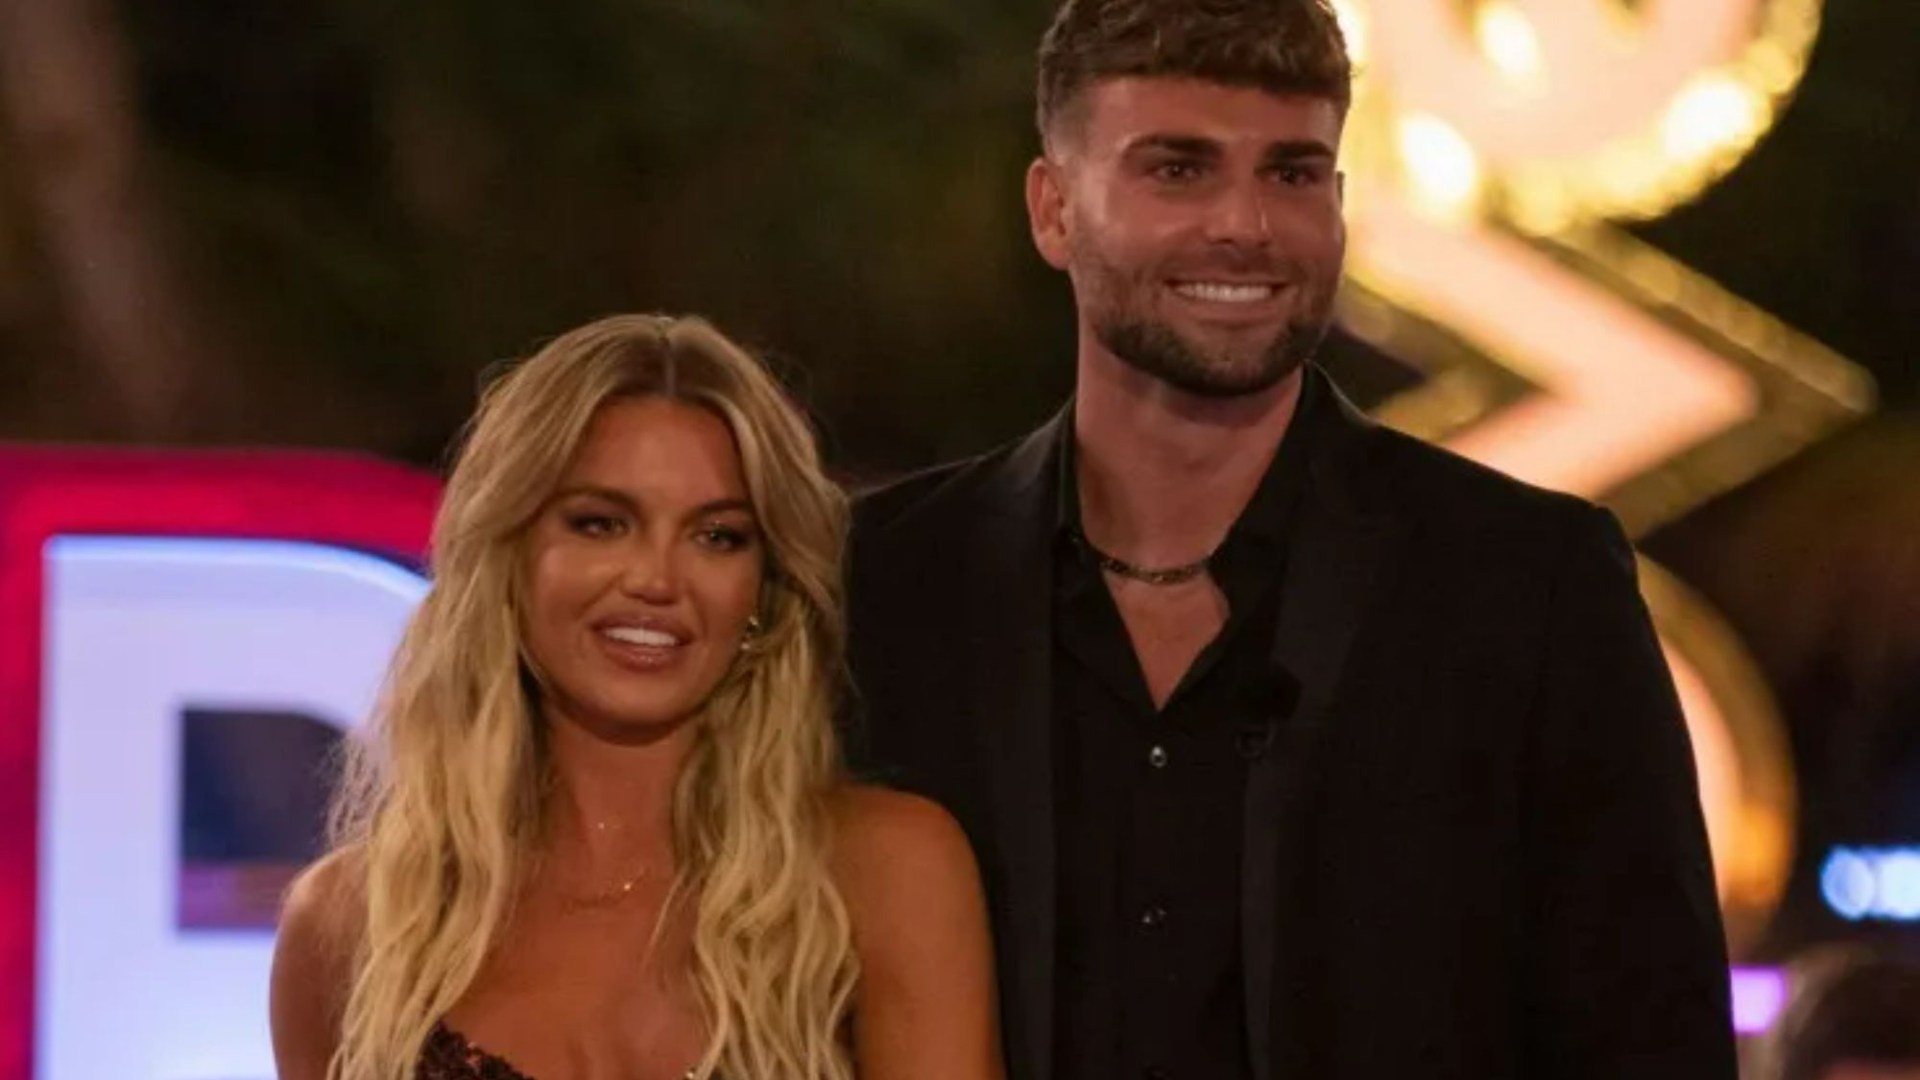 Shocking Love Island Finale: Fans Accuse Tom of Game Plan as He Wins with Molly – Uncover the Truth Now!